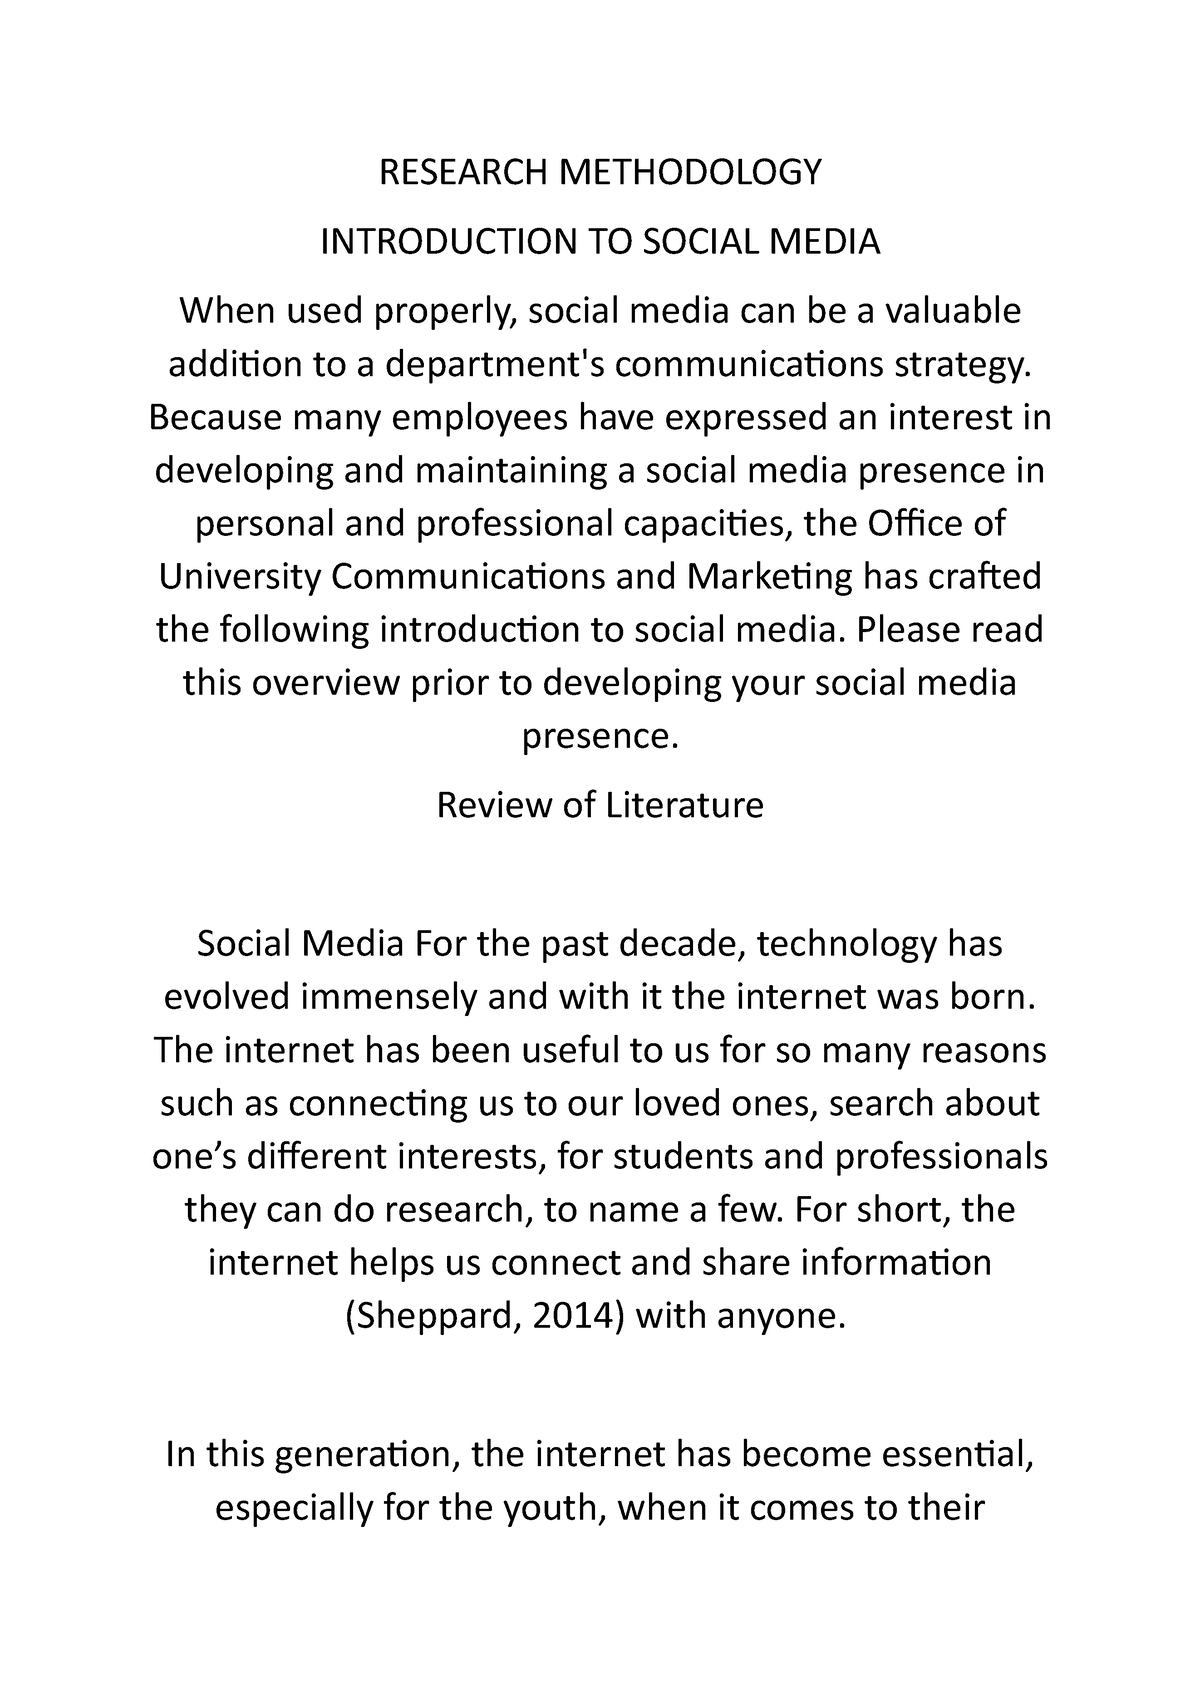 research title about trends in social media